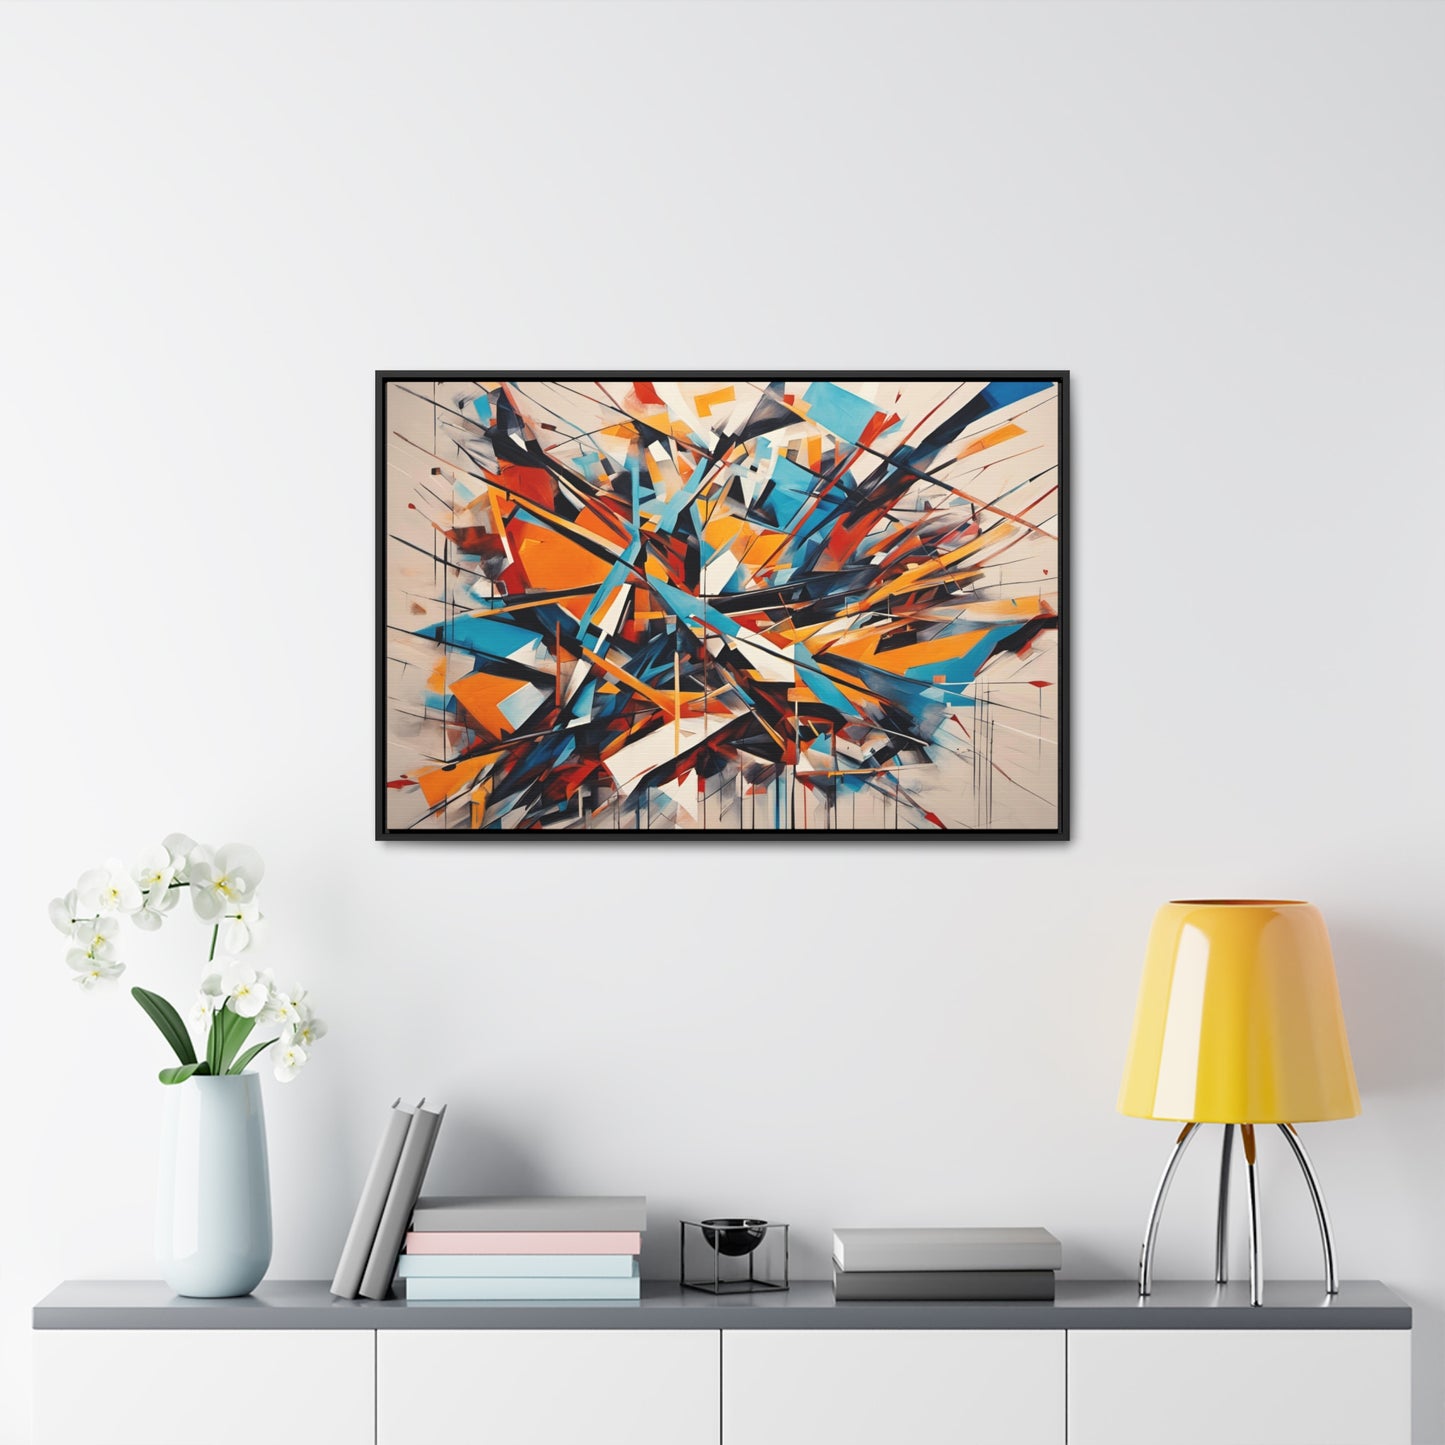 Abstract Art Wall Print - Multicolor Explosion  Print on Canvas in a Floating Frame